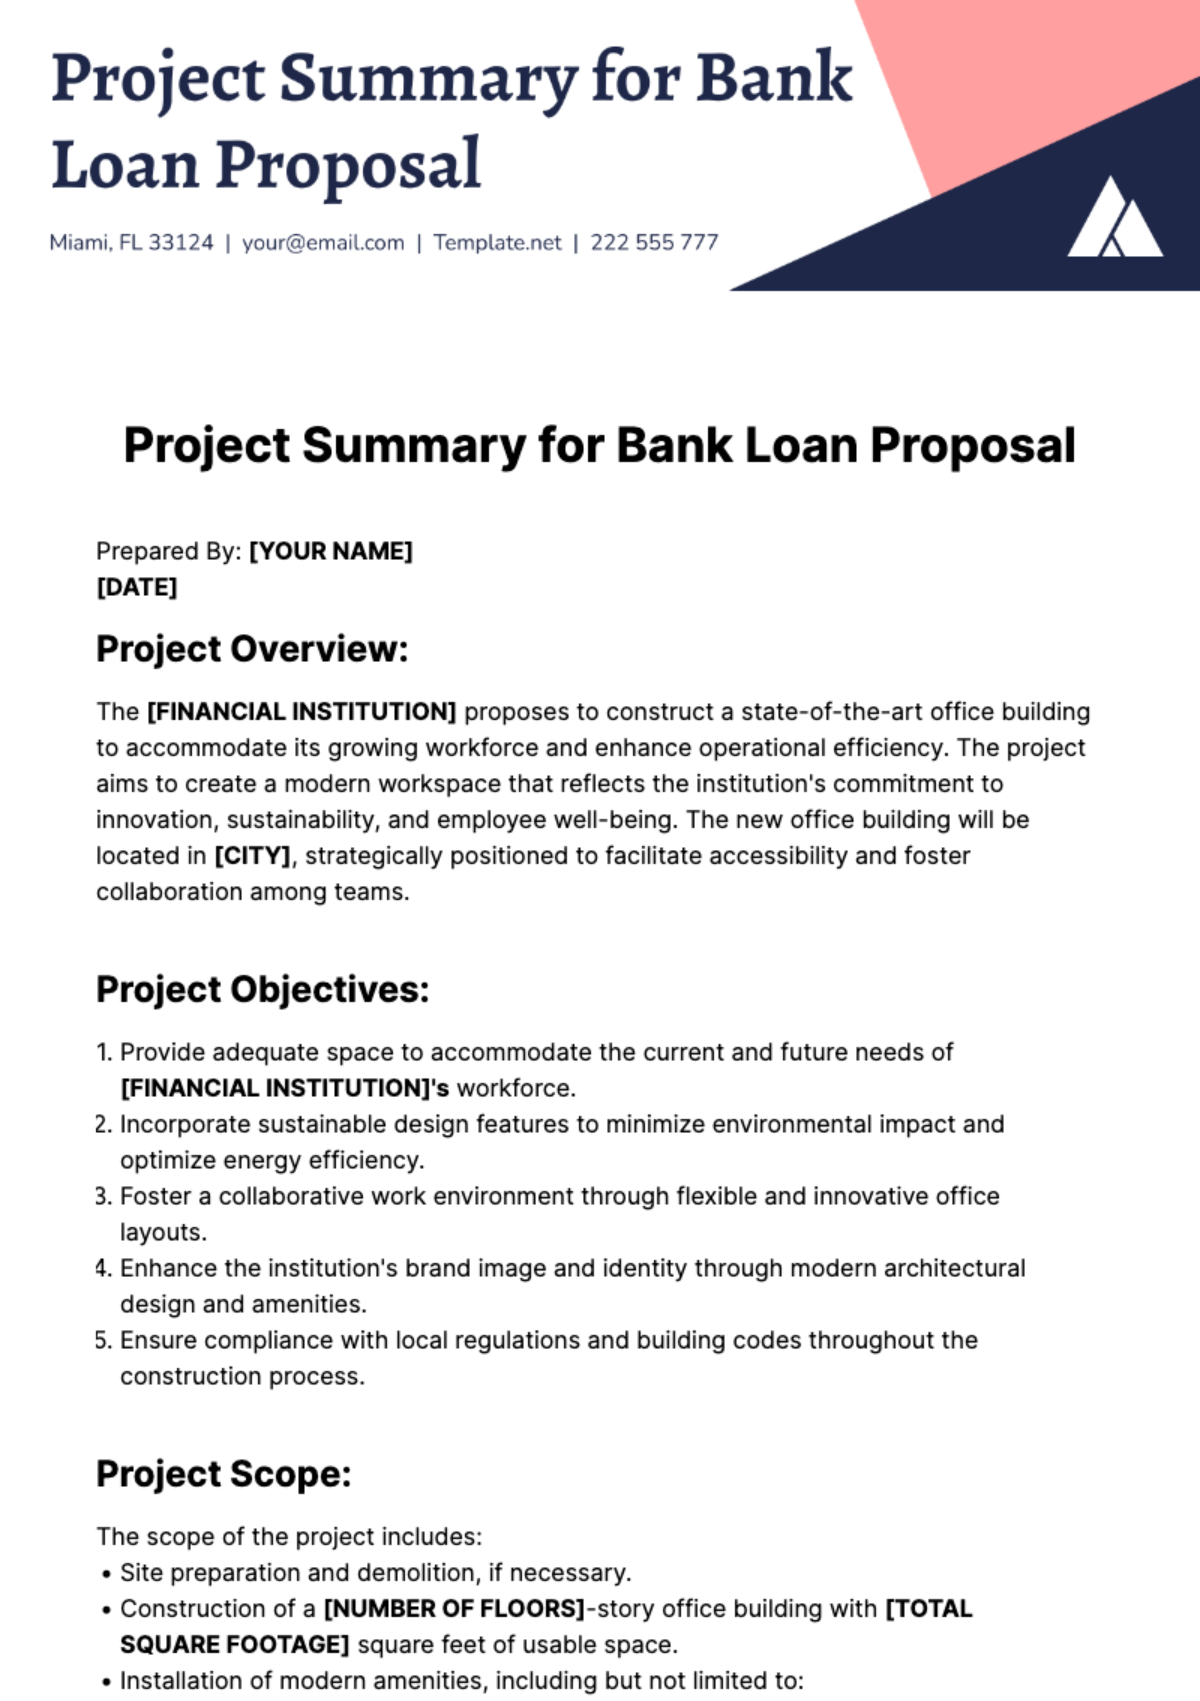 Free Project Summary for Bank Loan Proposal Template